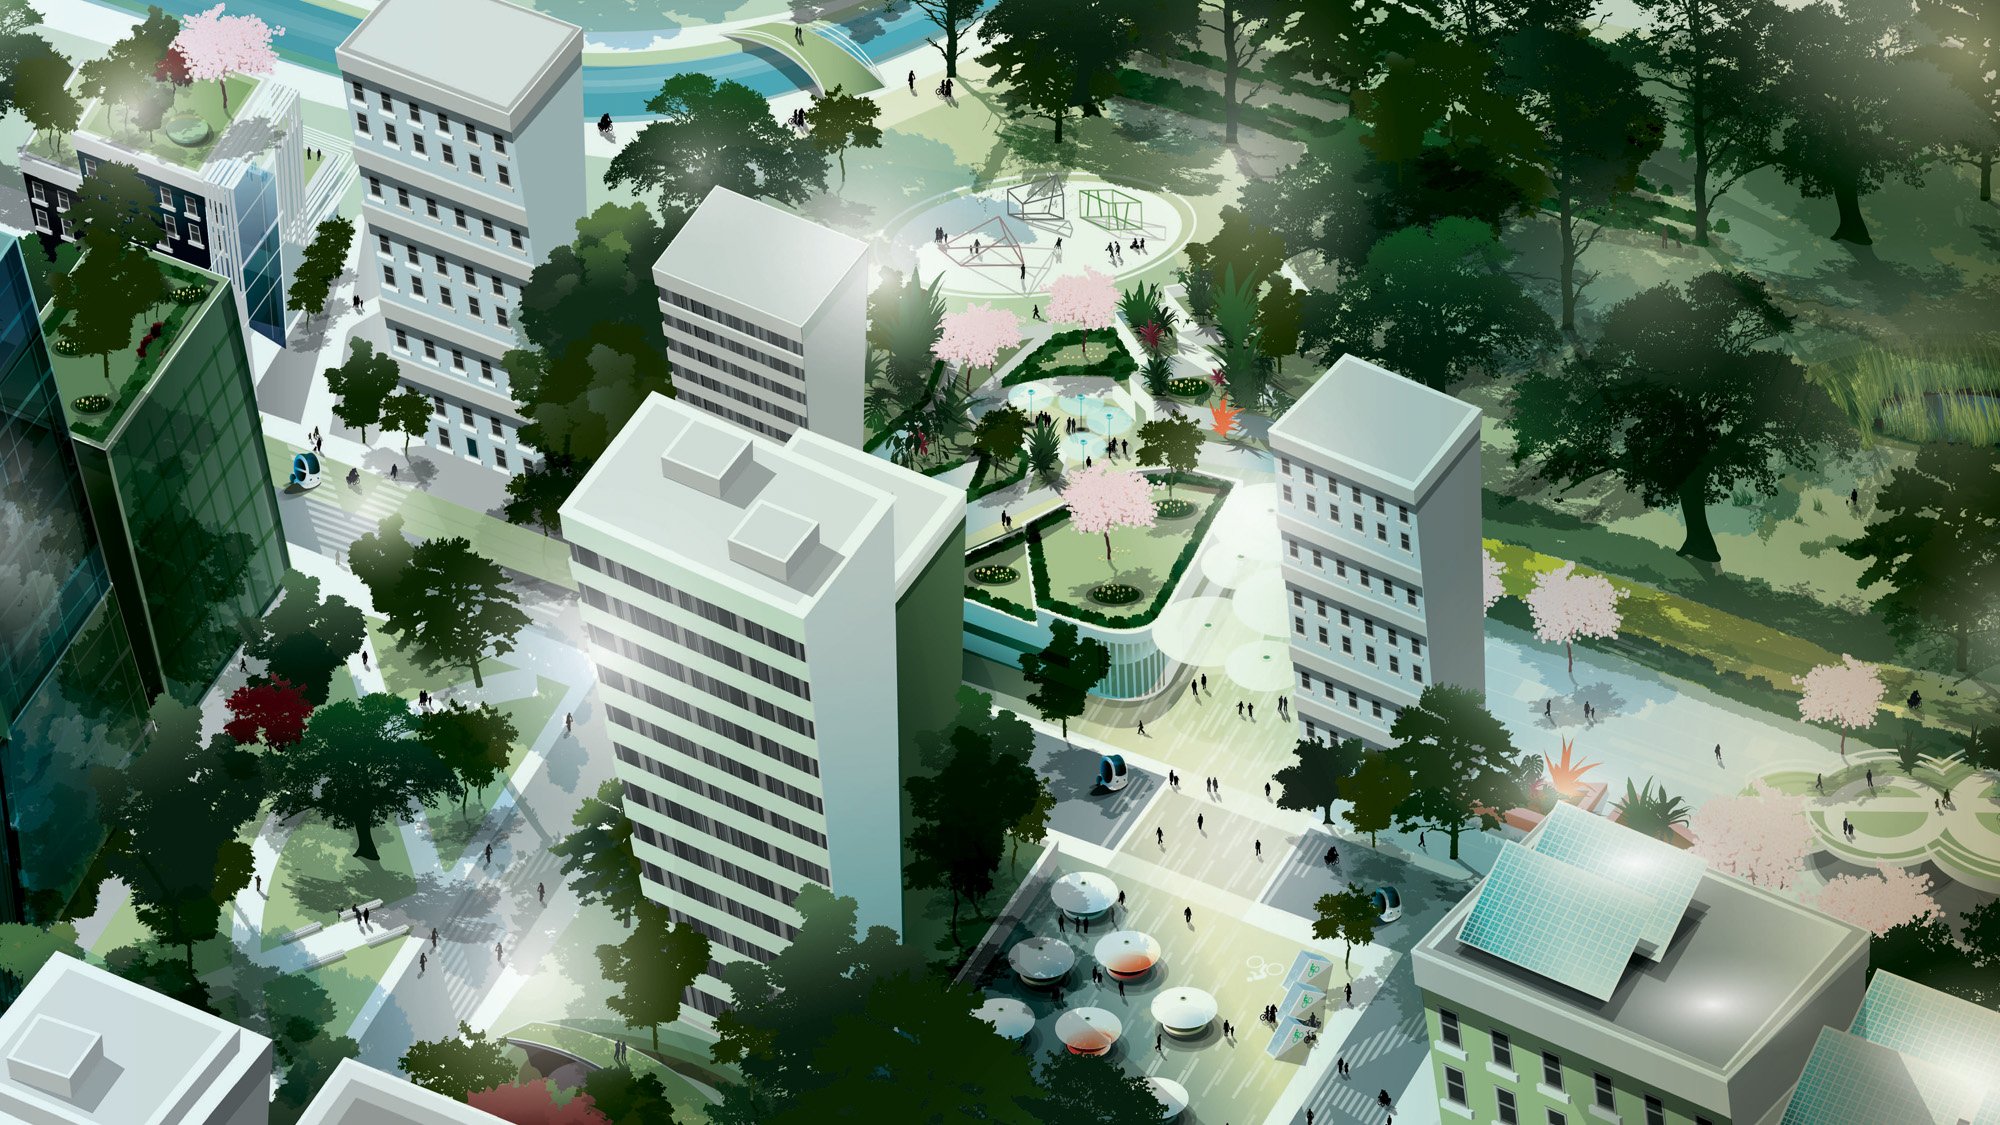 Artist's impression of green infrastructure. Credit: Arup